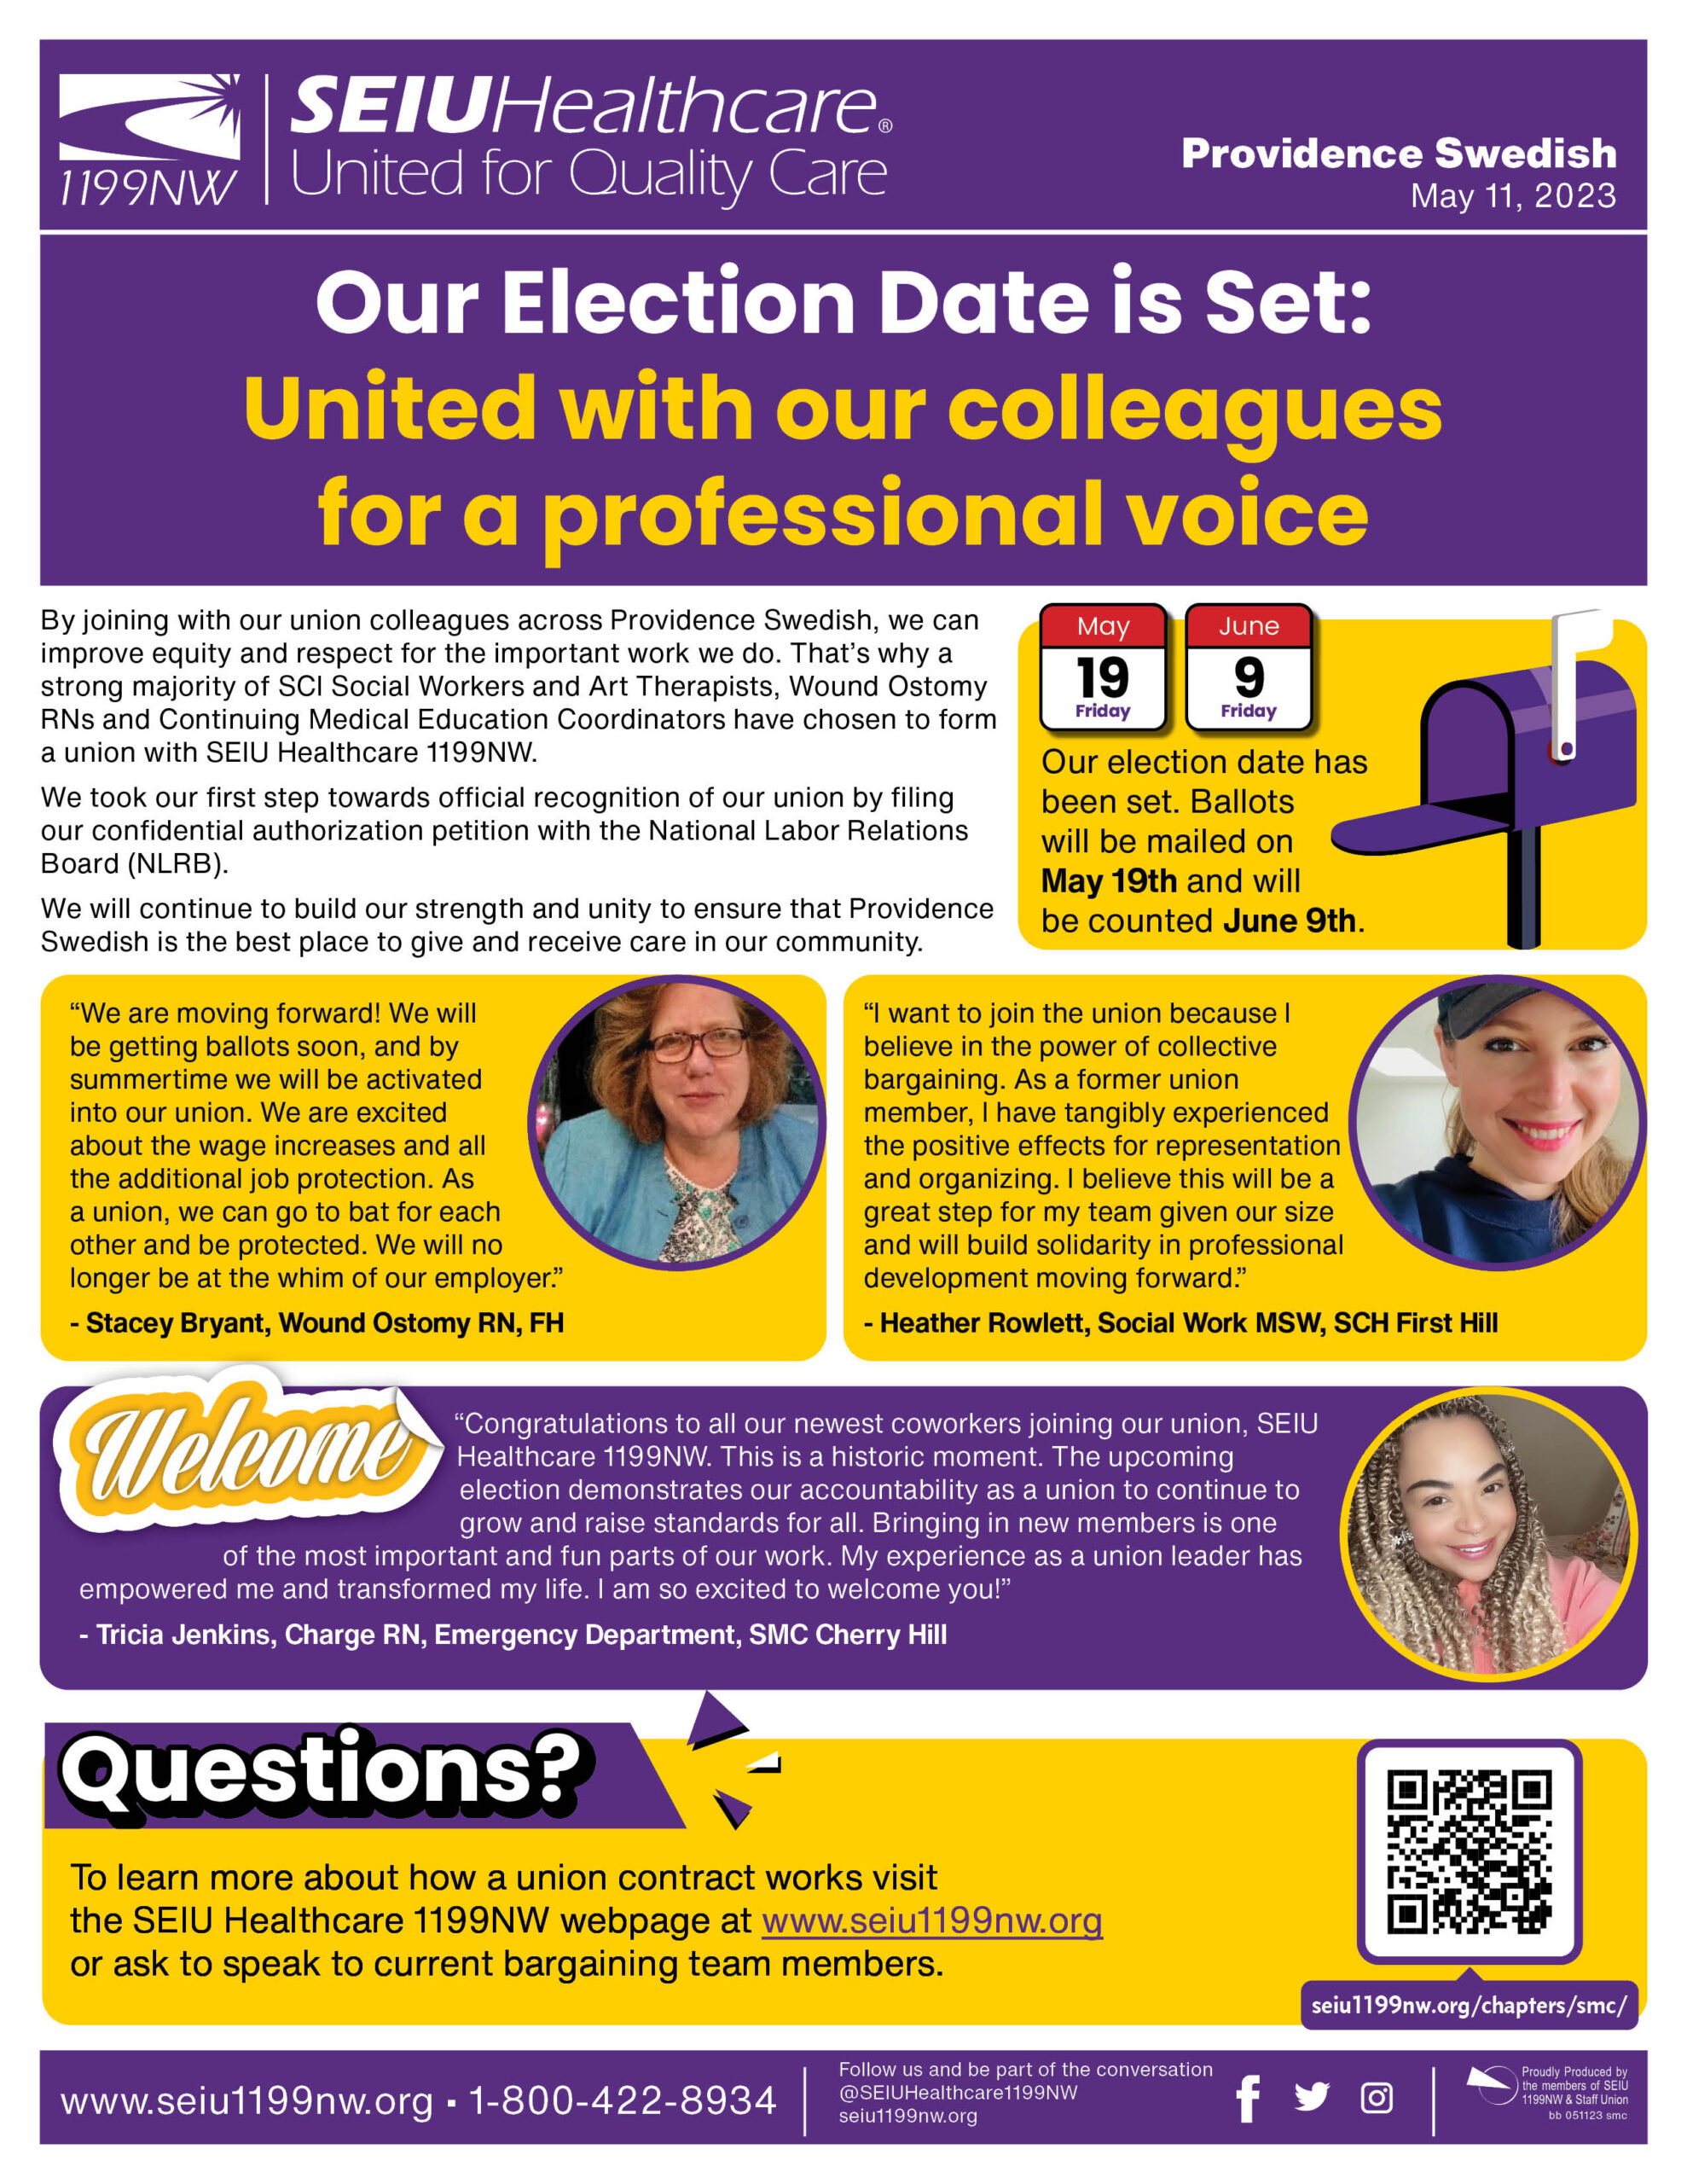 Our Election Date is Set: United with our colleagues for a professional voice